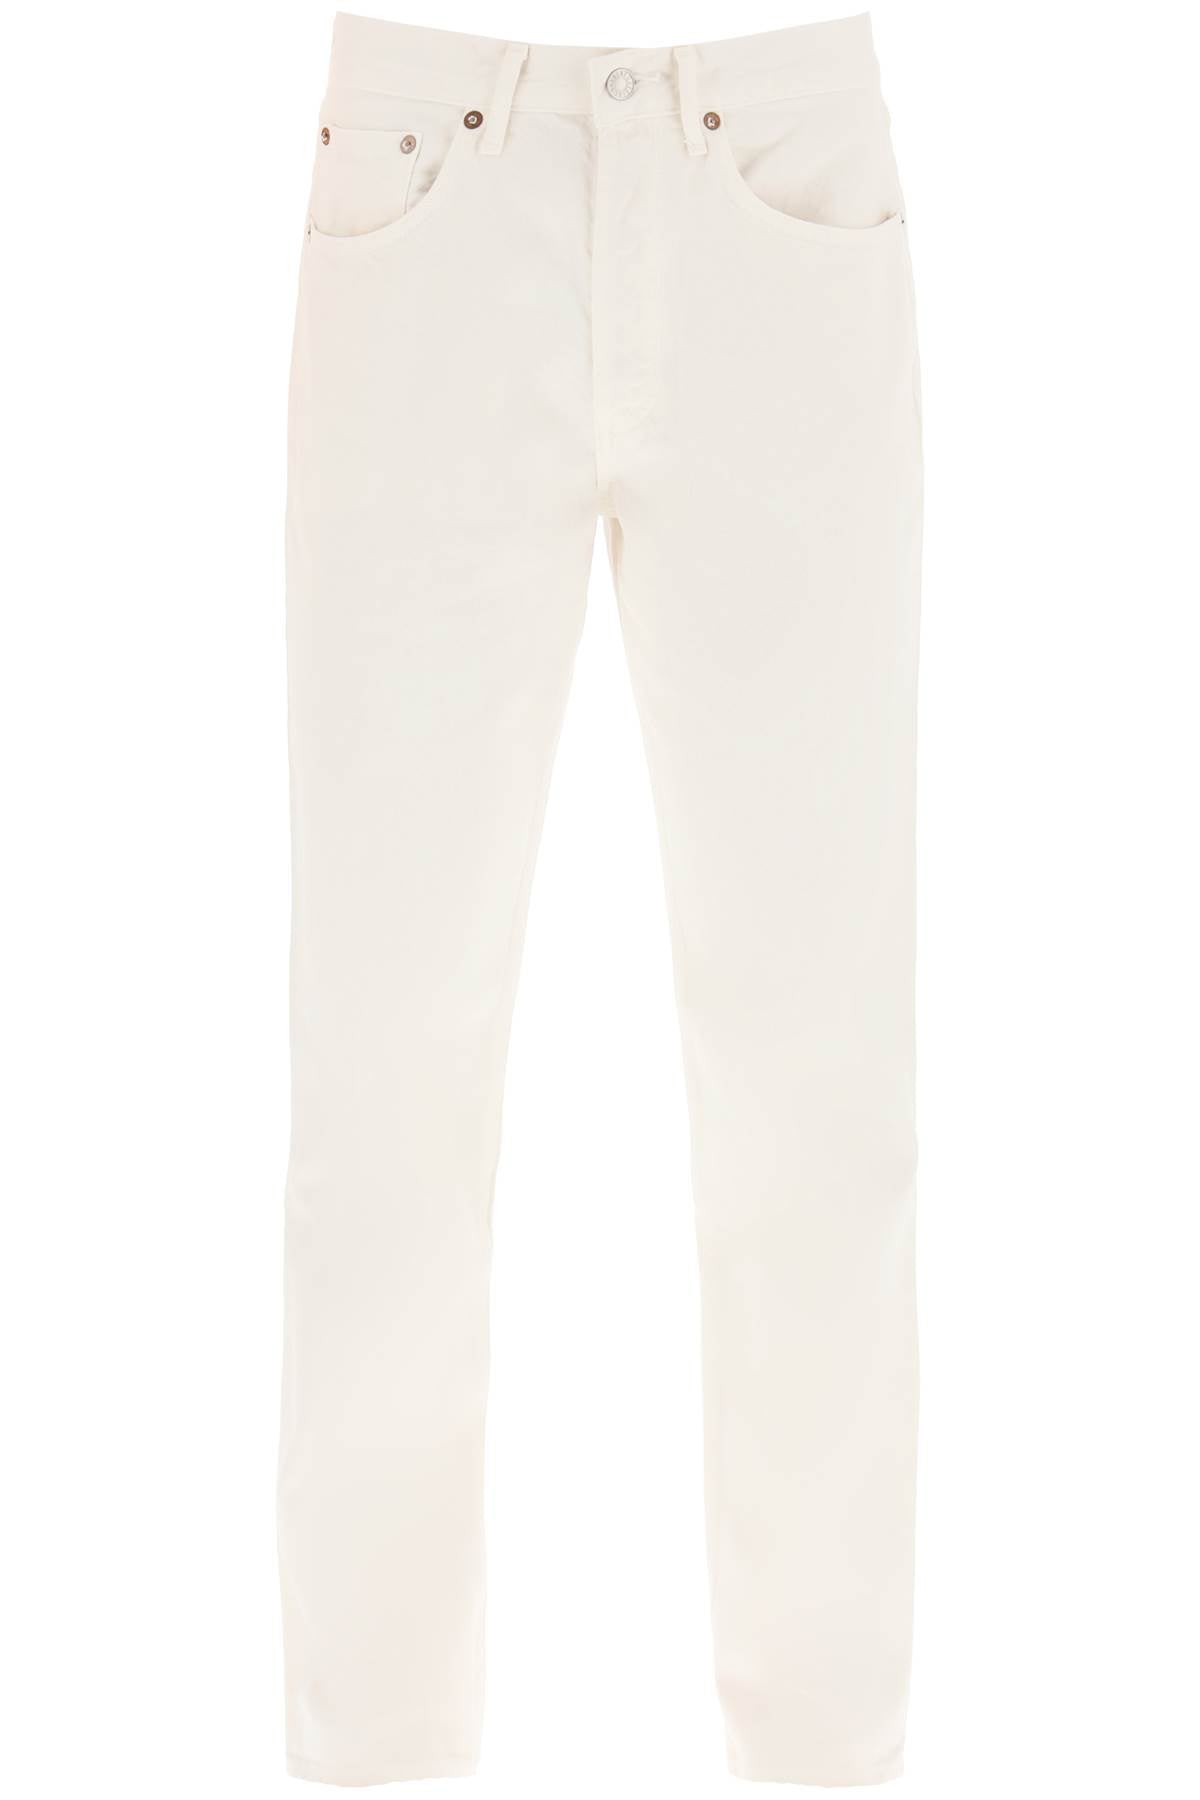 Agolde lana straight mid rise jeans-0